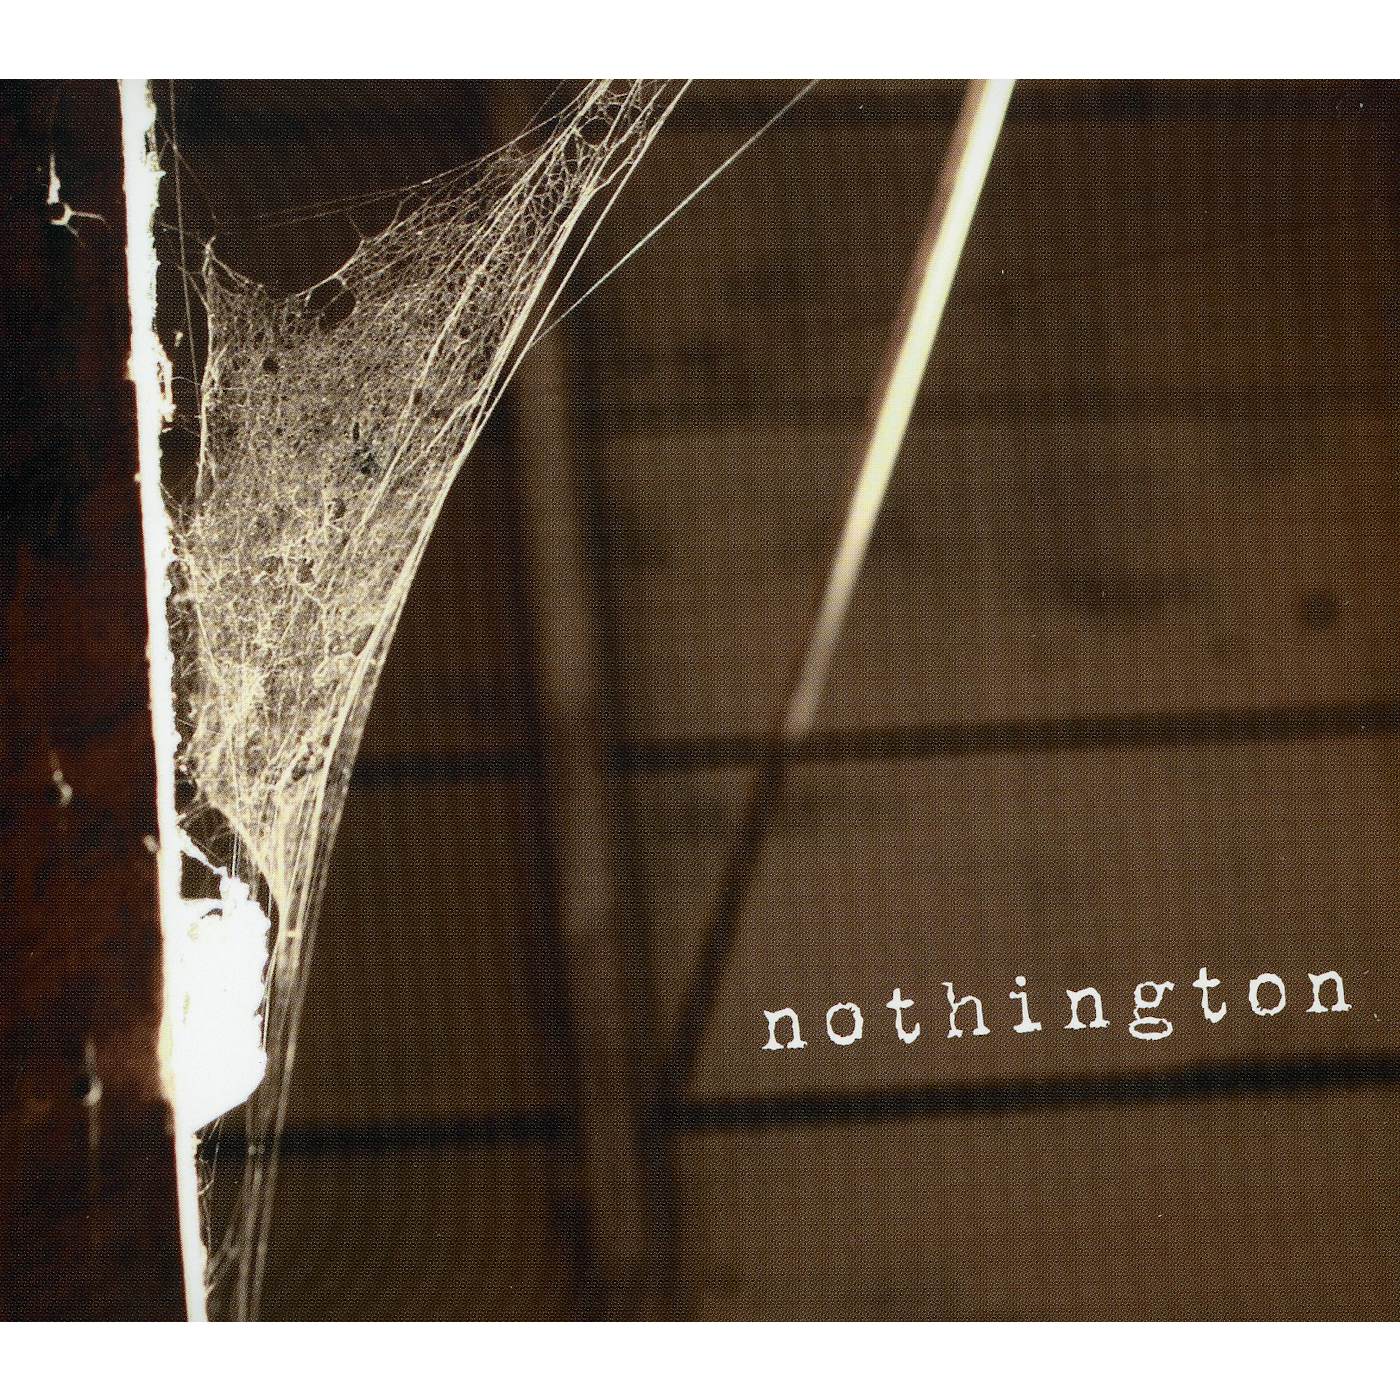 Nothington ALL IN CD